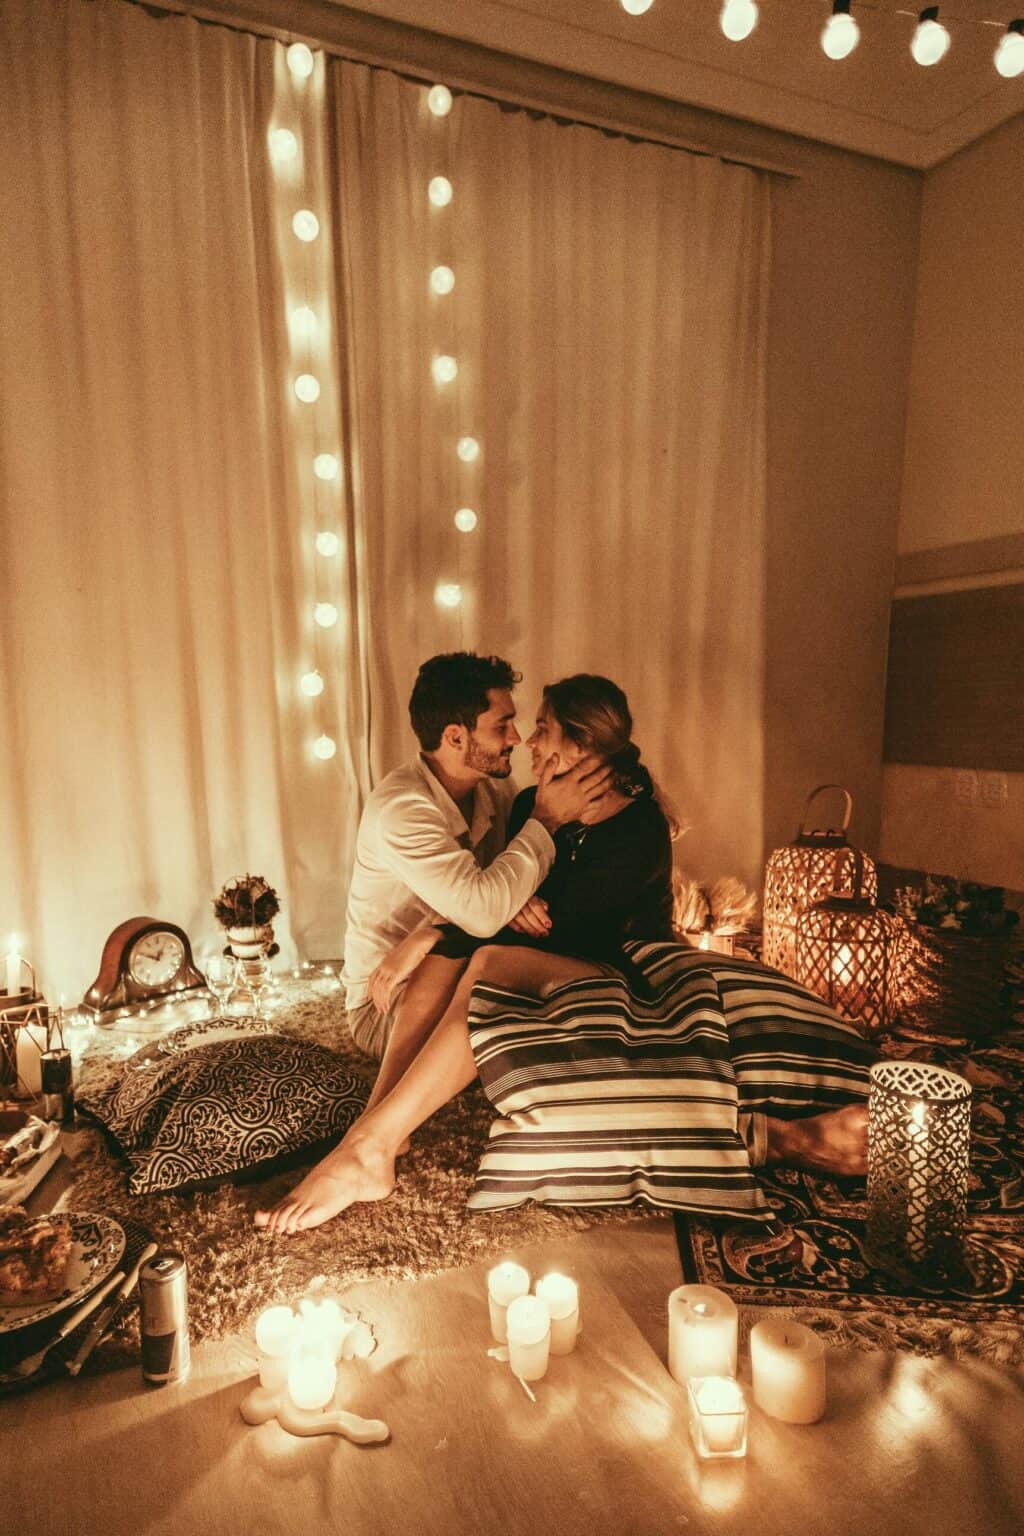 25 At Home Date Night Ideas That Will Make You Fall More In Love